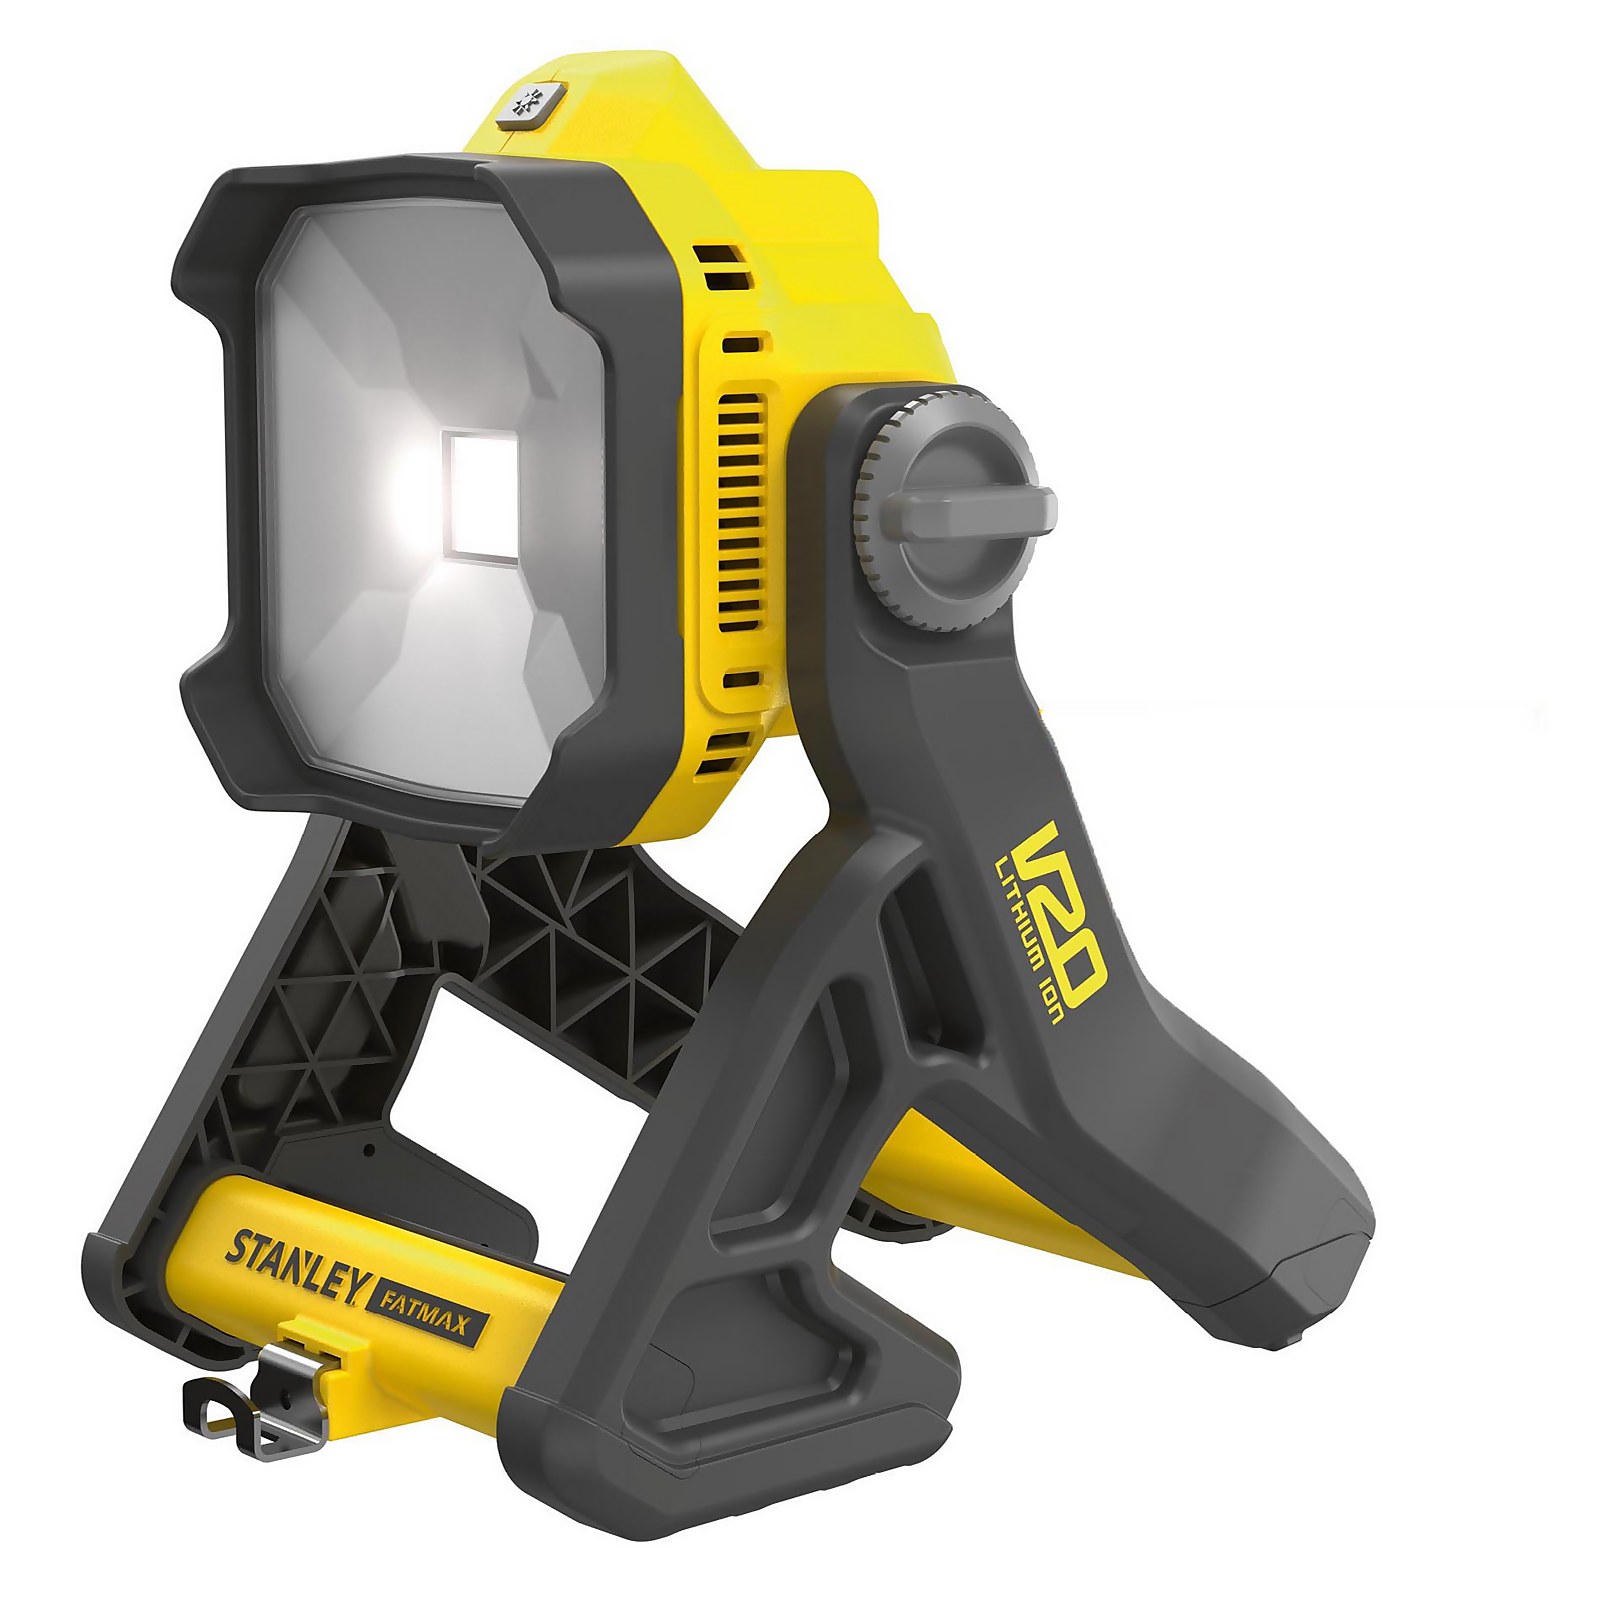 Photo of Stanley Fatmax 18v V20 Area Light -no Battery Included-